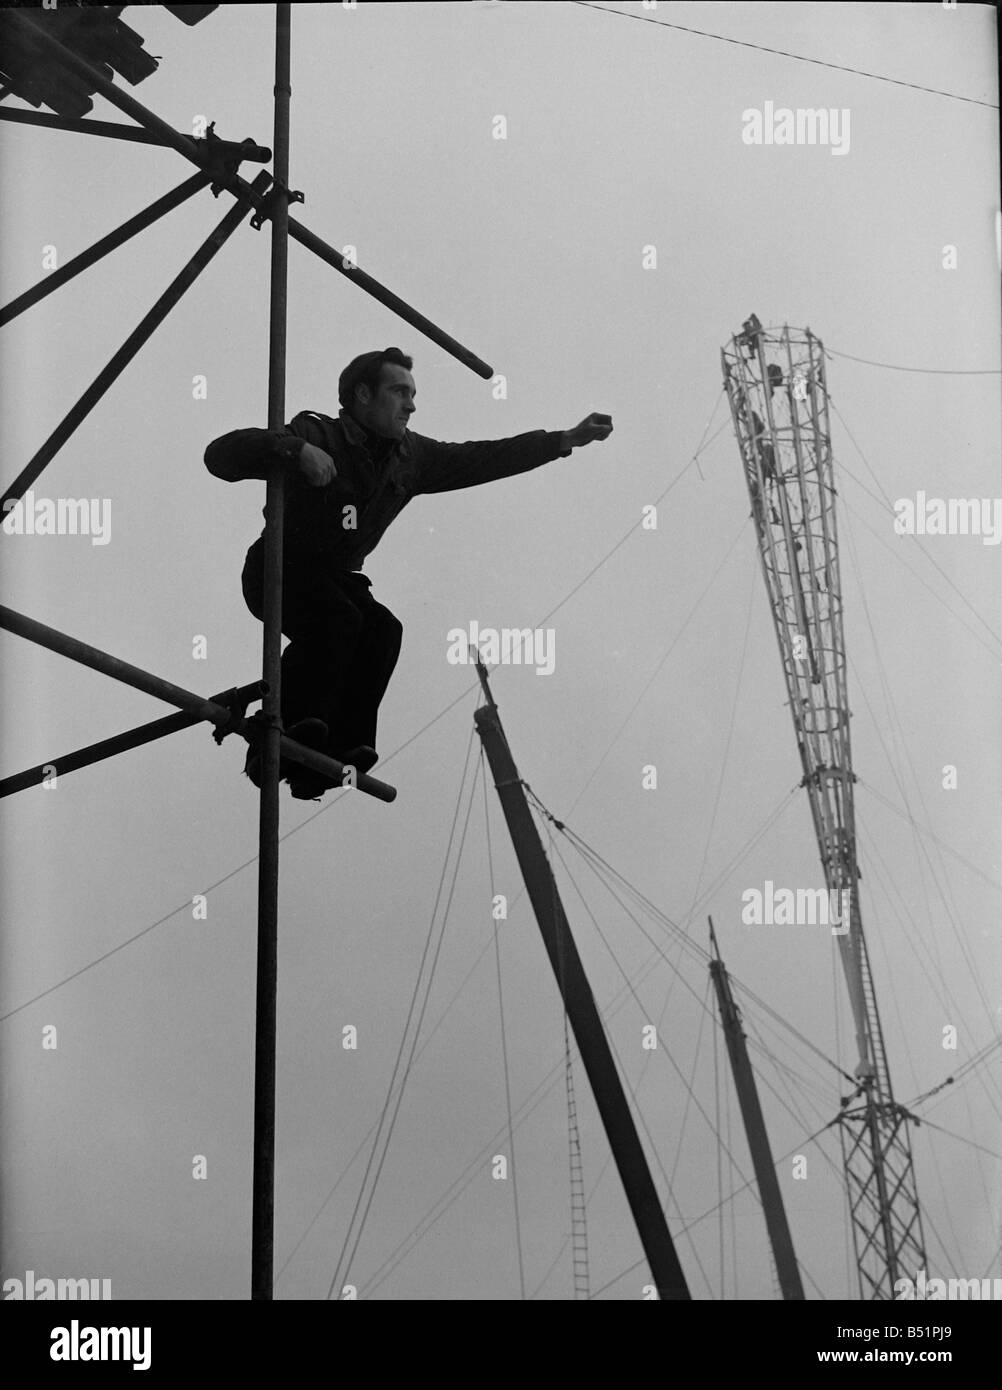 South Bank, London 1951;Work in progress on the 300 ft vertical Skylon Feature of the Festival of Britain.;DM 27/2/1951;Staff Photographer Greenwell 26/2/1951;B935/5; Stock Photo